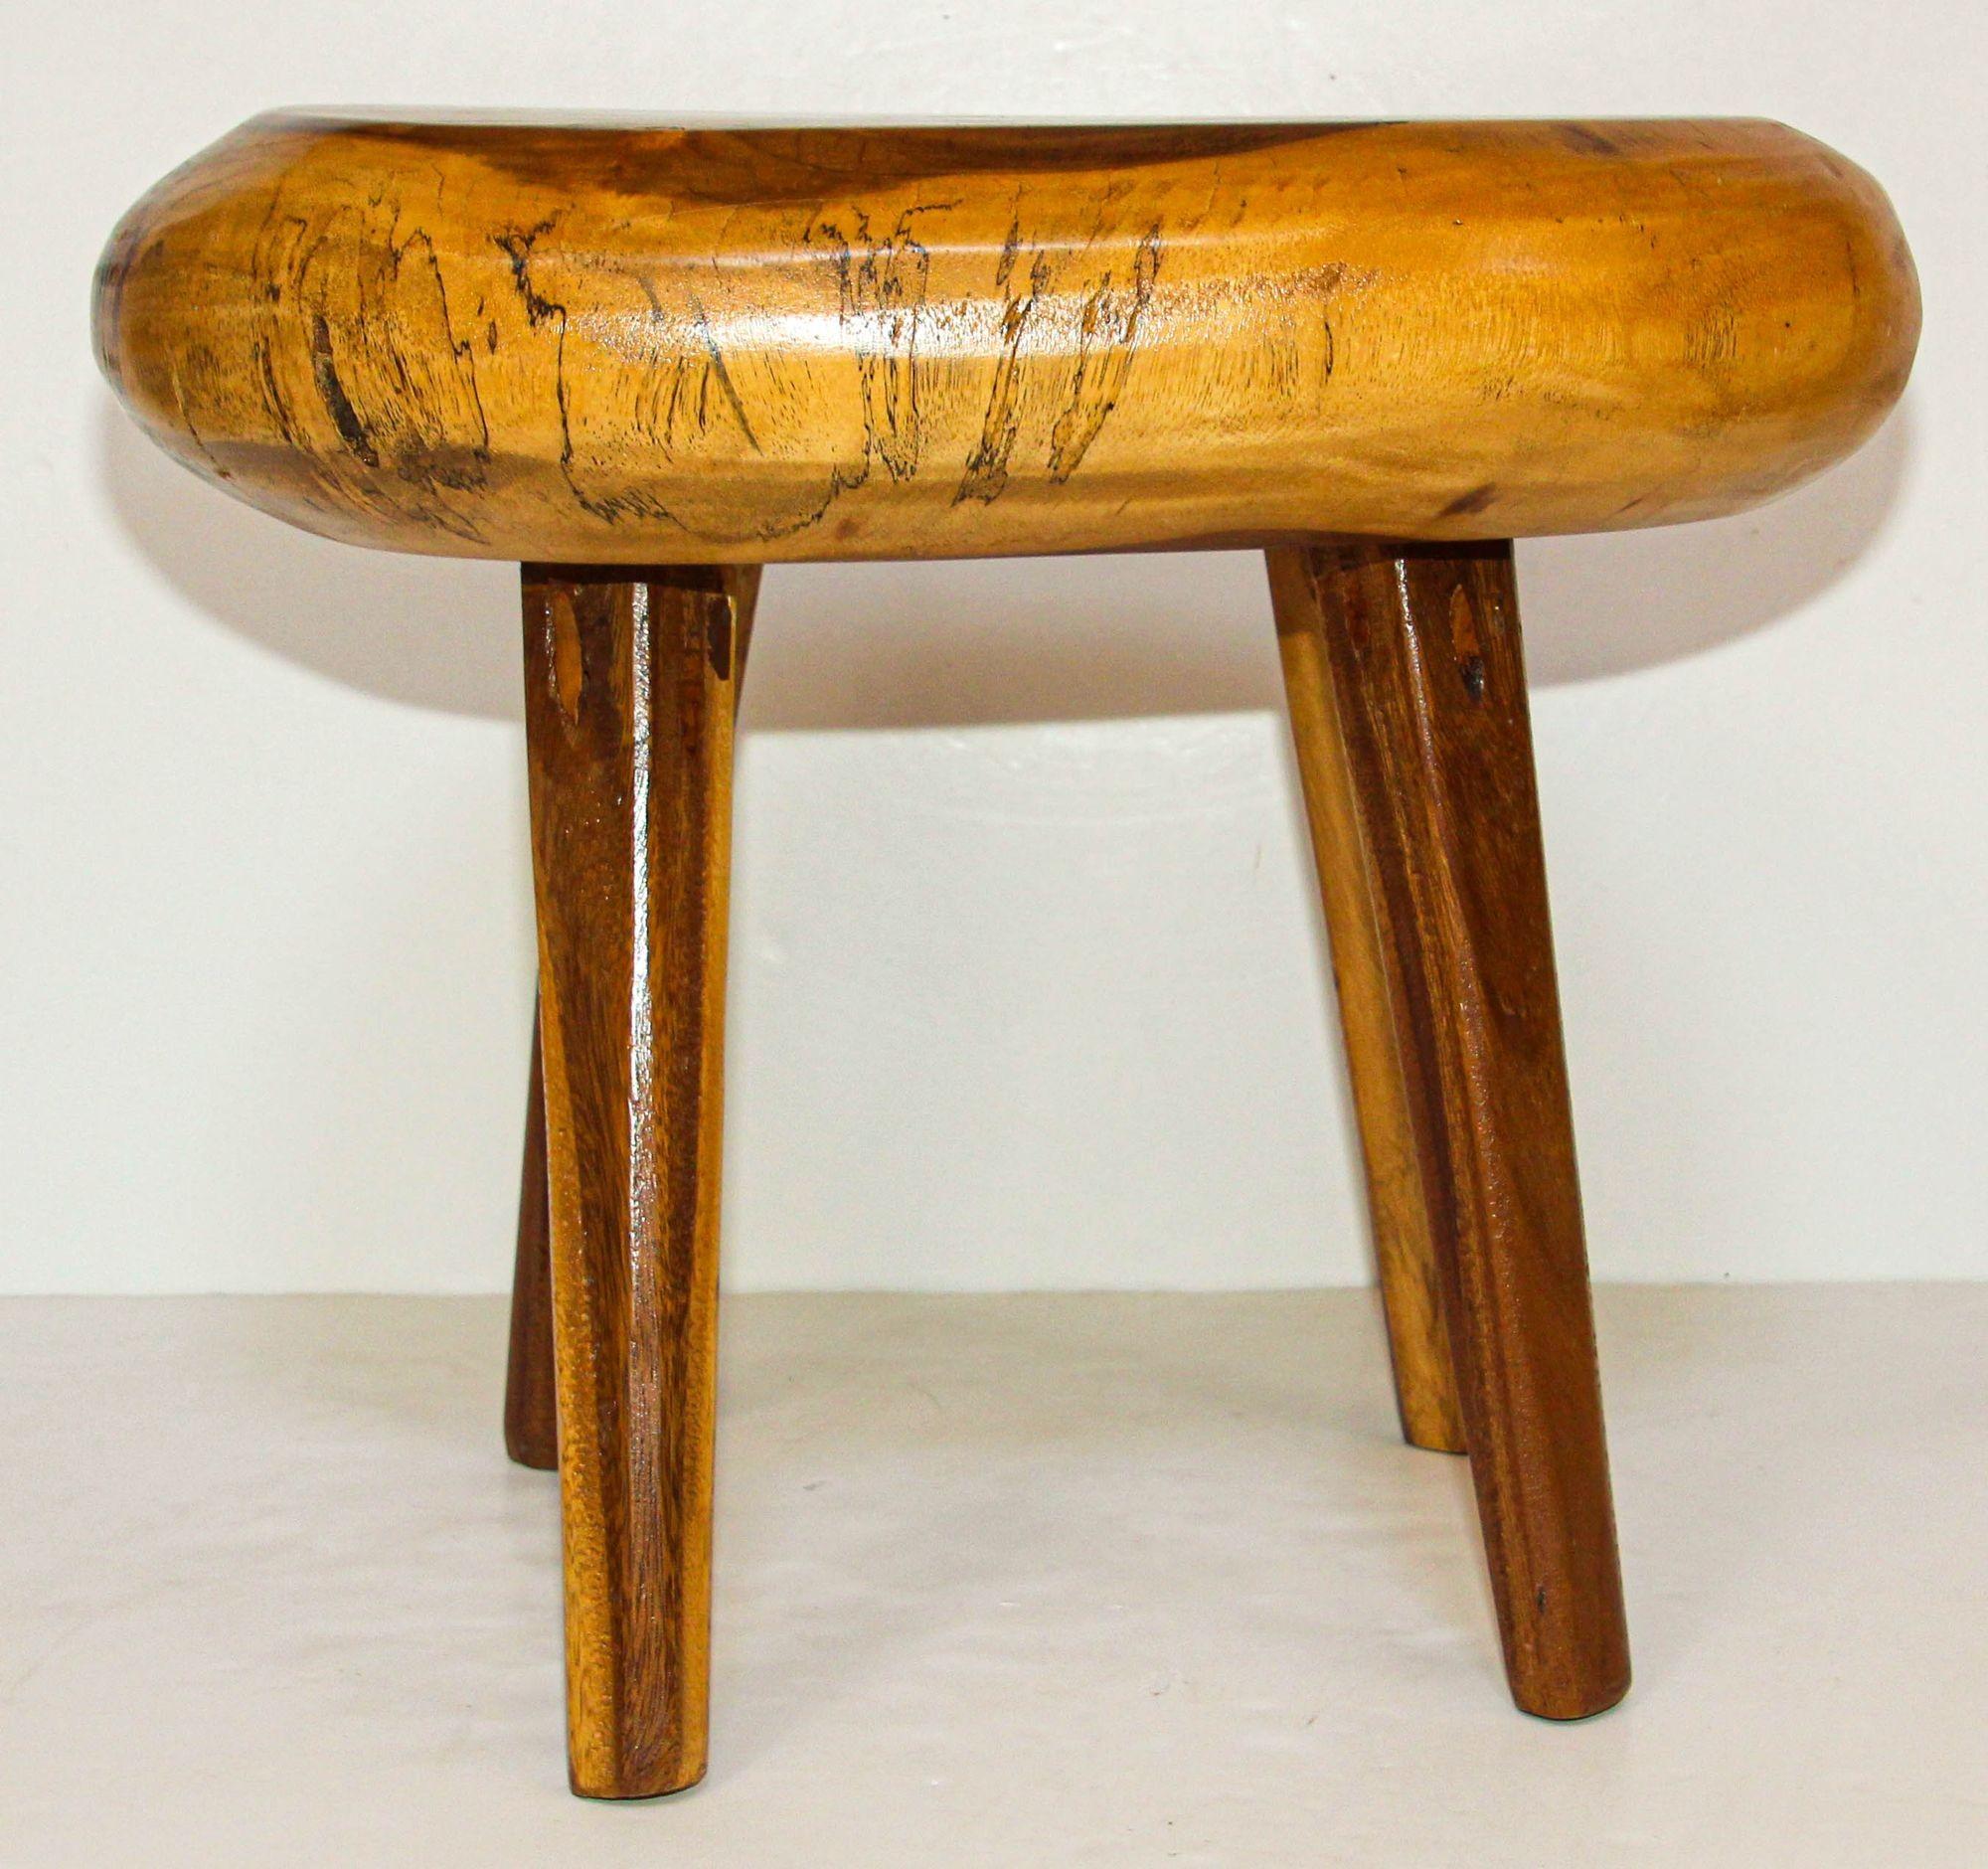 Sculptural Accent Side Table Hand Crafted Wabi Sabi Organic Mango Wood In Good Condition For Sale In North Hollywood, CA